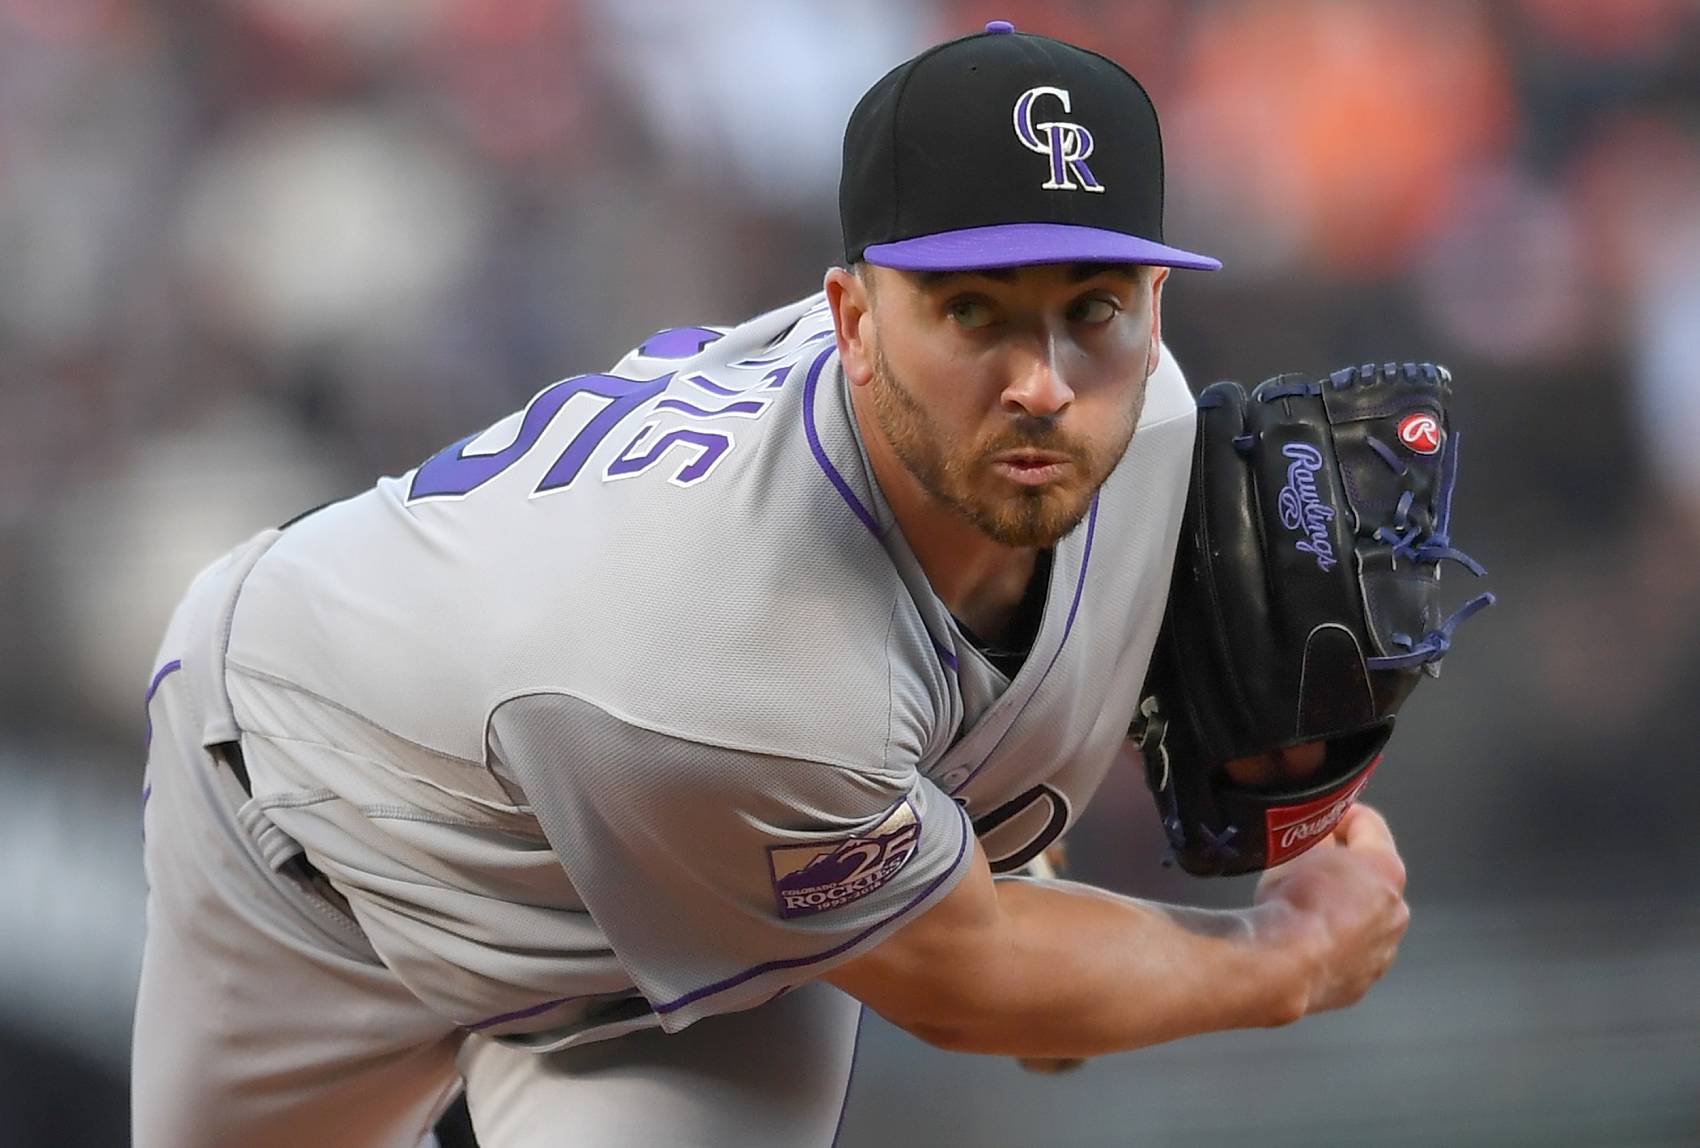 Former Colorado Rockies pitcher Chad Bettis, a cancer survivor, is retiring from baseball with his "head held high."